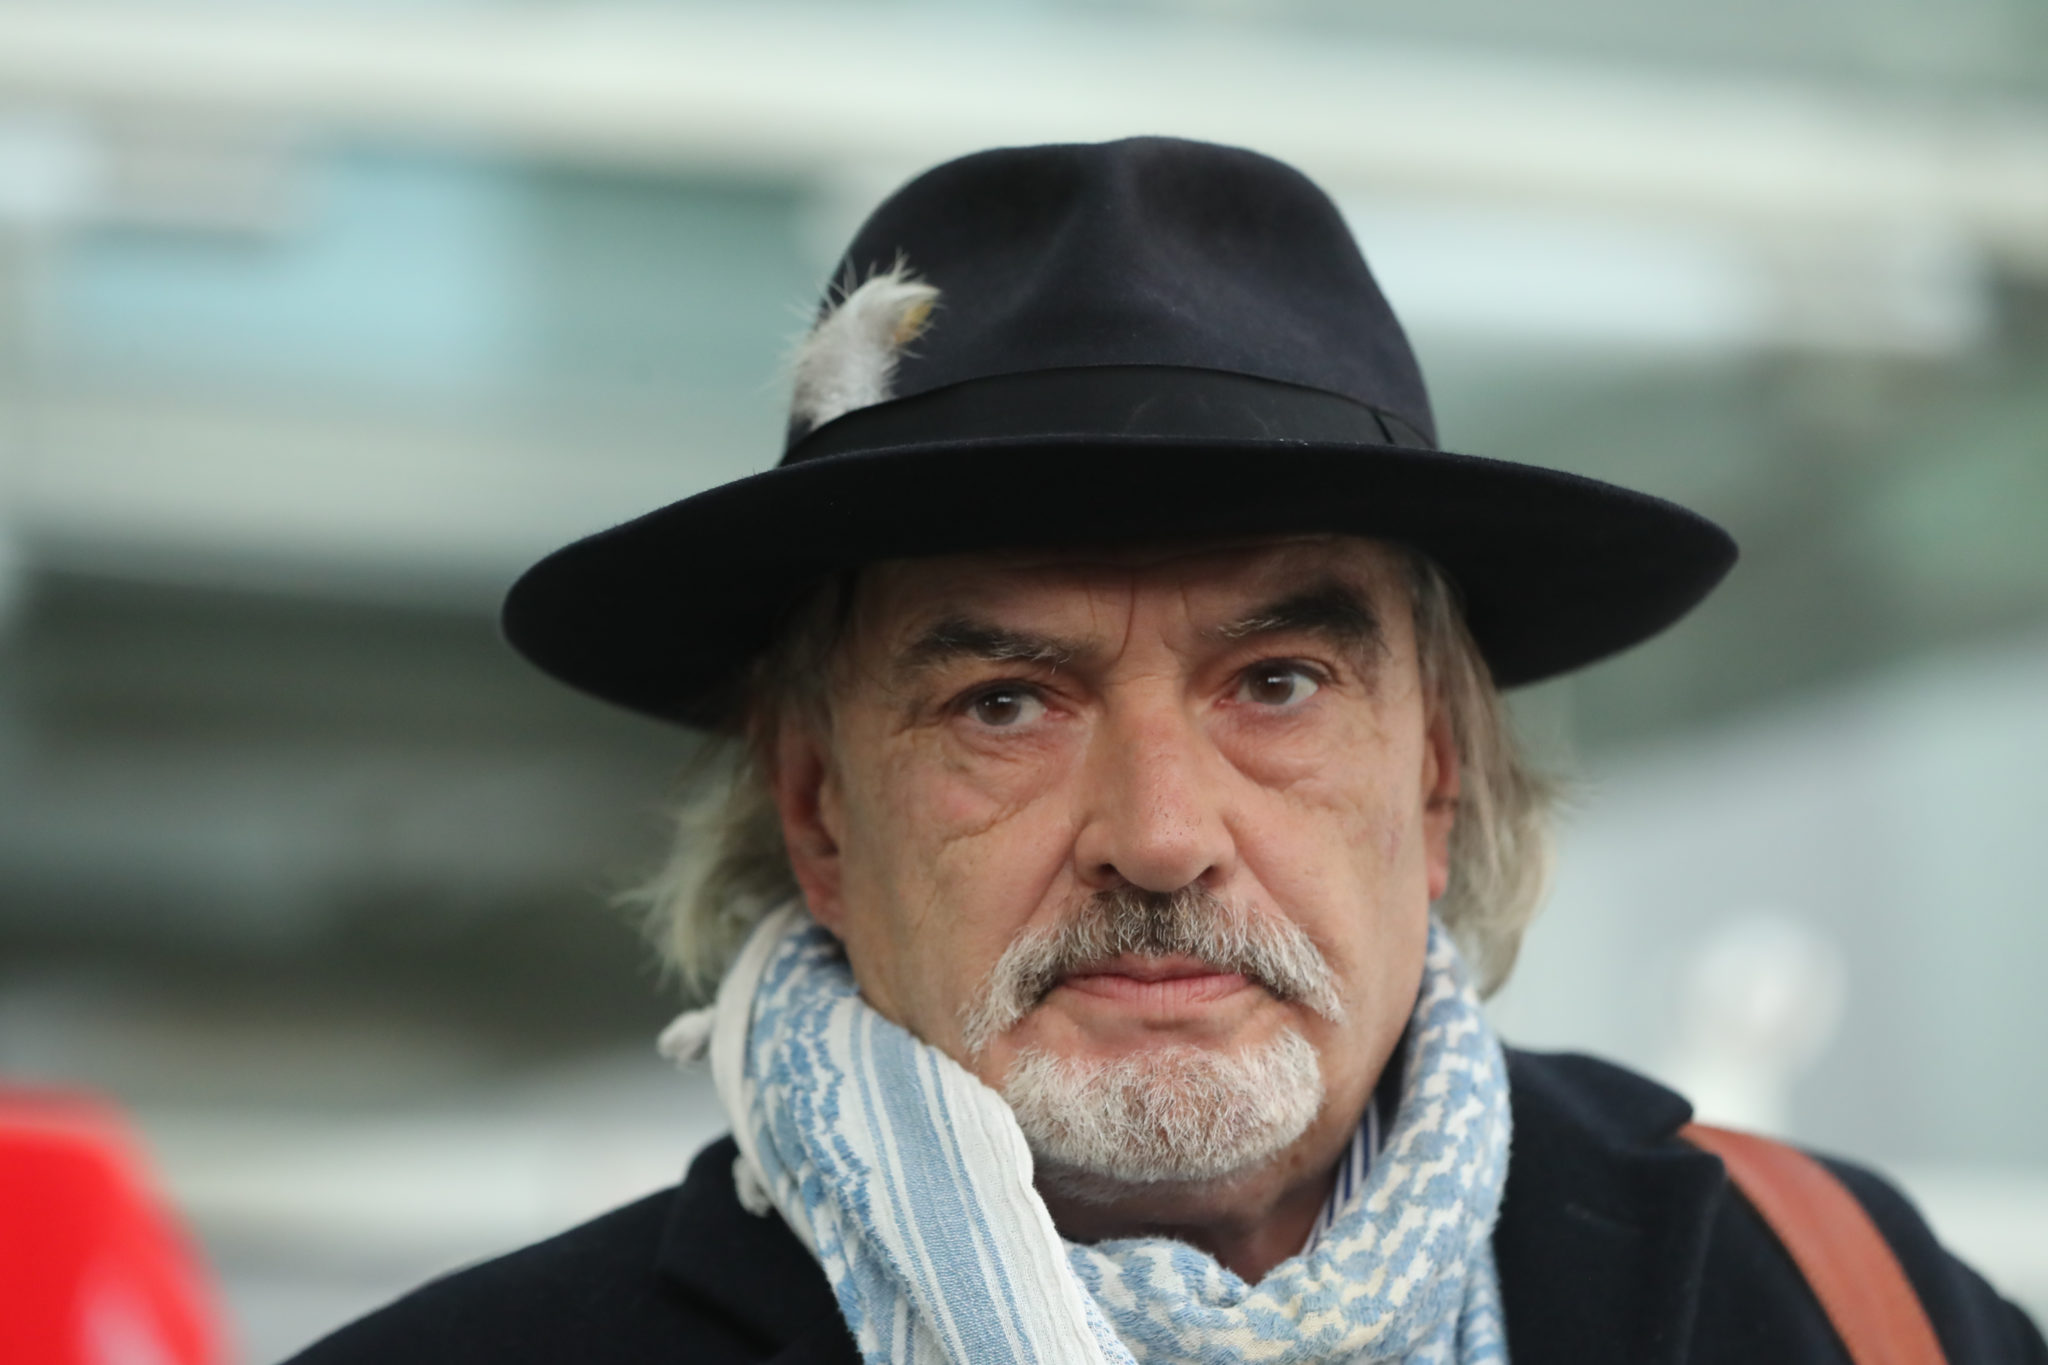 Ian Bailey outside the High Court in Dublin, after the court rejected an attempt by French authorities to extradite him for the murder of Sophie Toscan du Plantier, in October 2020